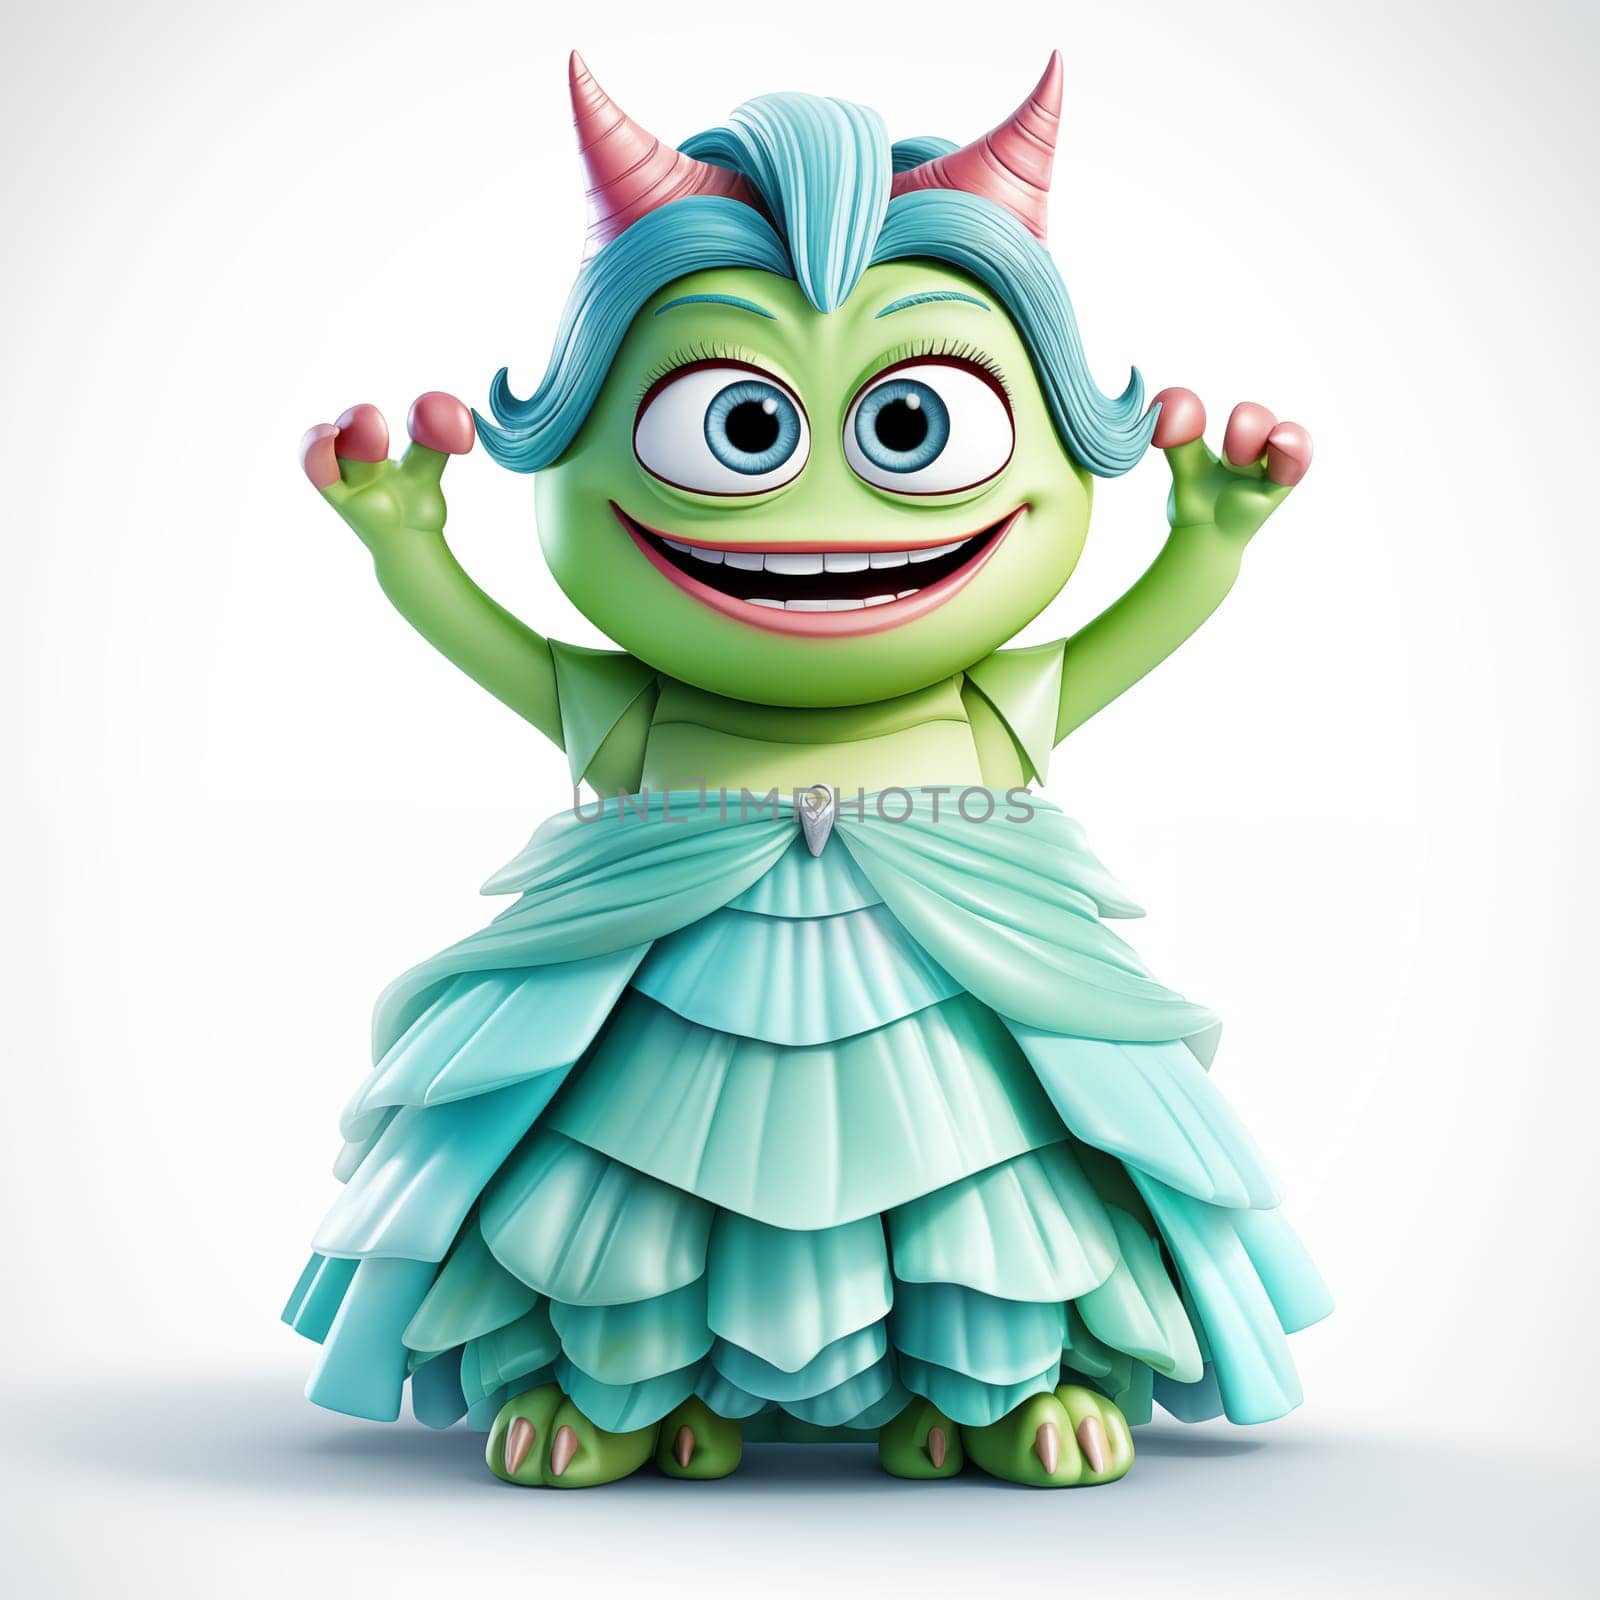 Happy green stylish monster in blue dress, standing on a white background.